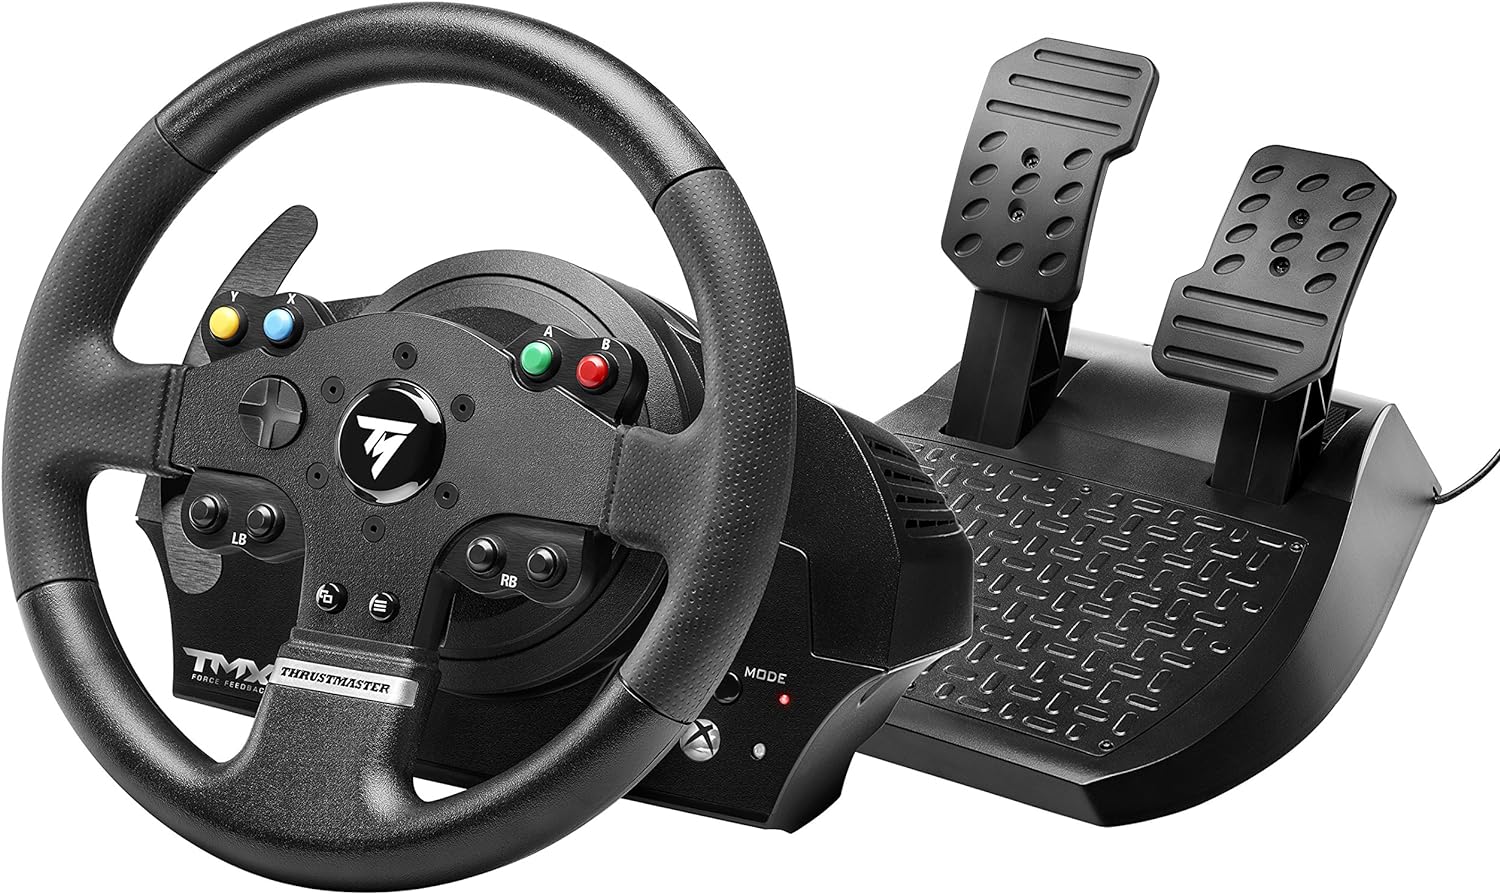 JOYPAD CONTROLLER FOR DRIVING SIMULATORS, Thrustmaster TMX Force Feedback Steering Wheel + Pedals For PC/Xbox 